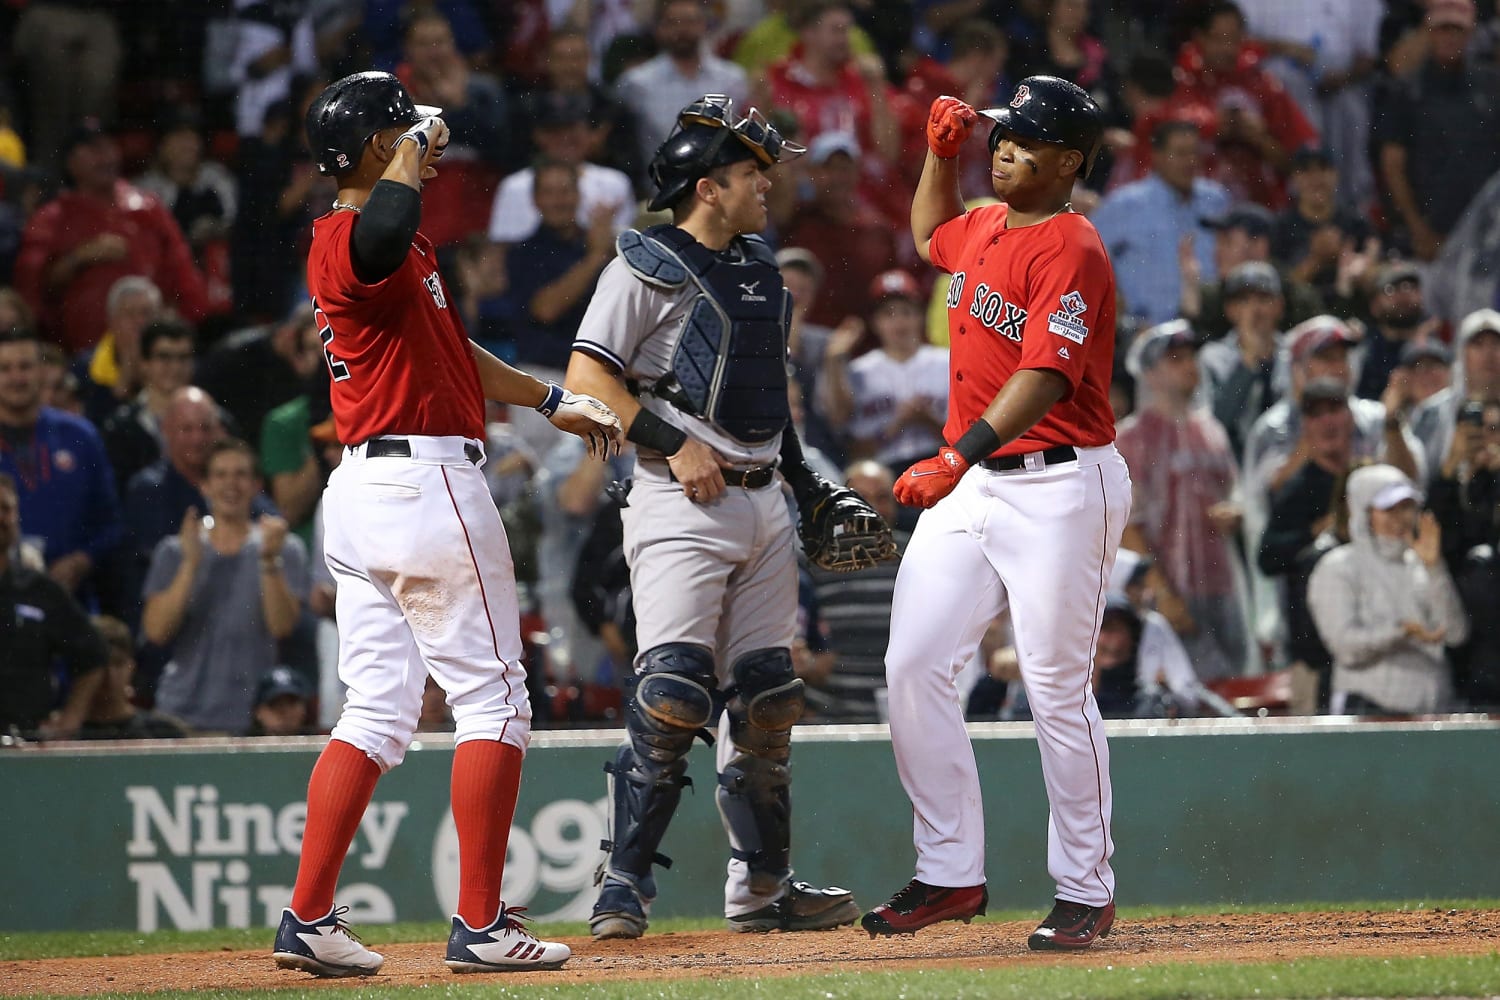 How an Apple Watch Helped the Boston Red Sox Cheat Against the Yankees   TheStreet